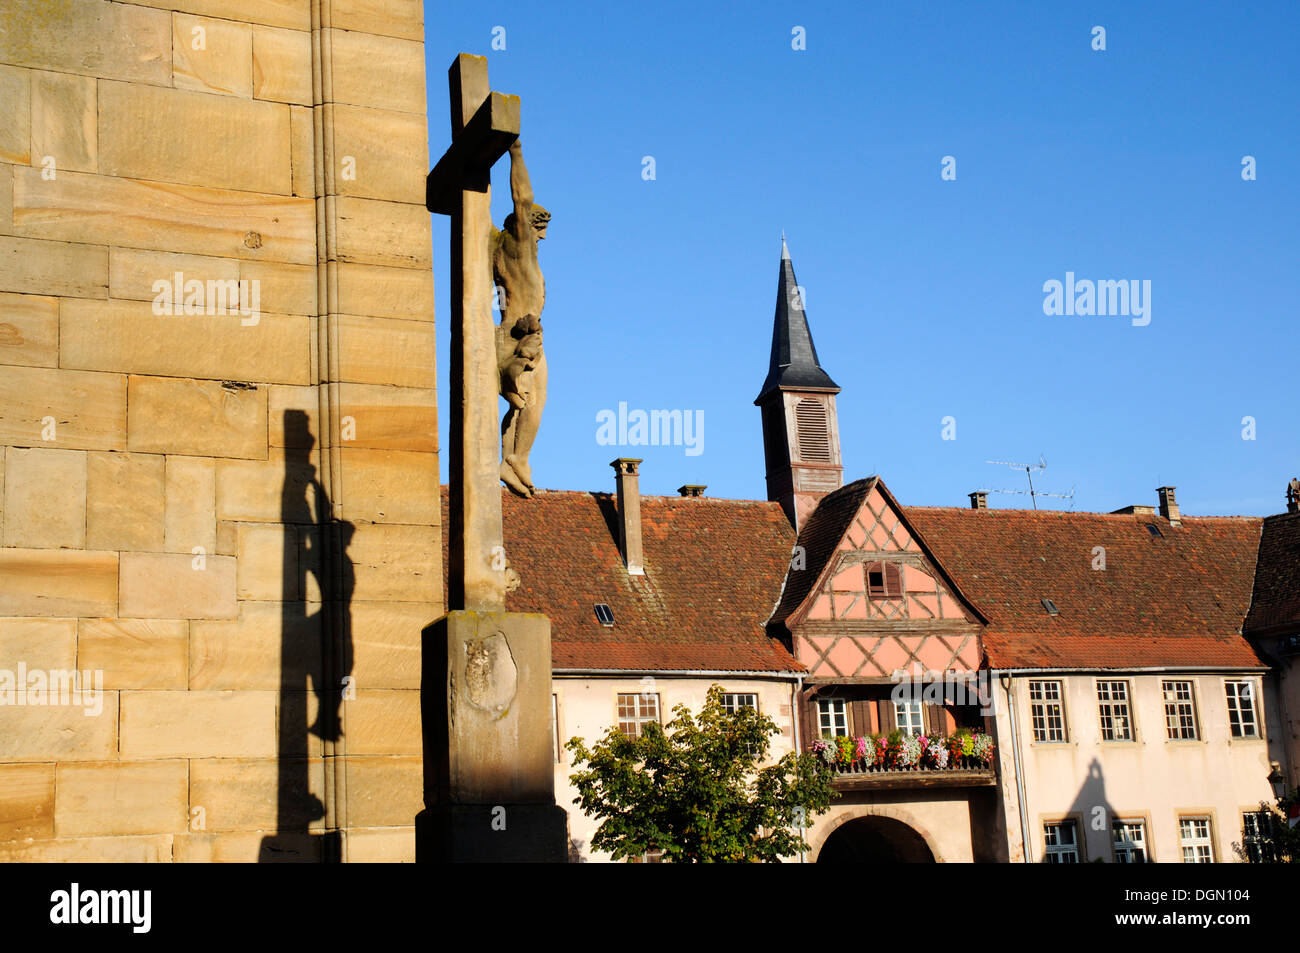 The quaint Alsace town of Rosheim, France Stock Photo